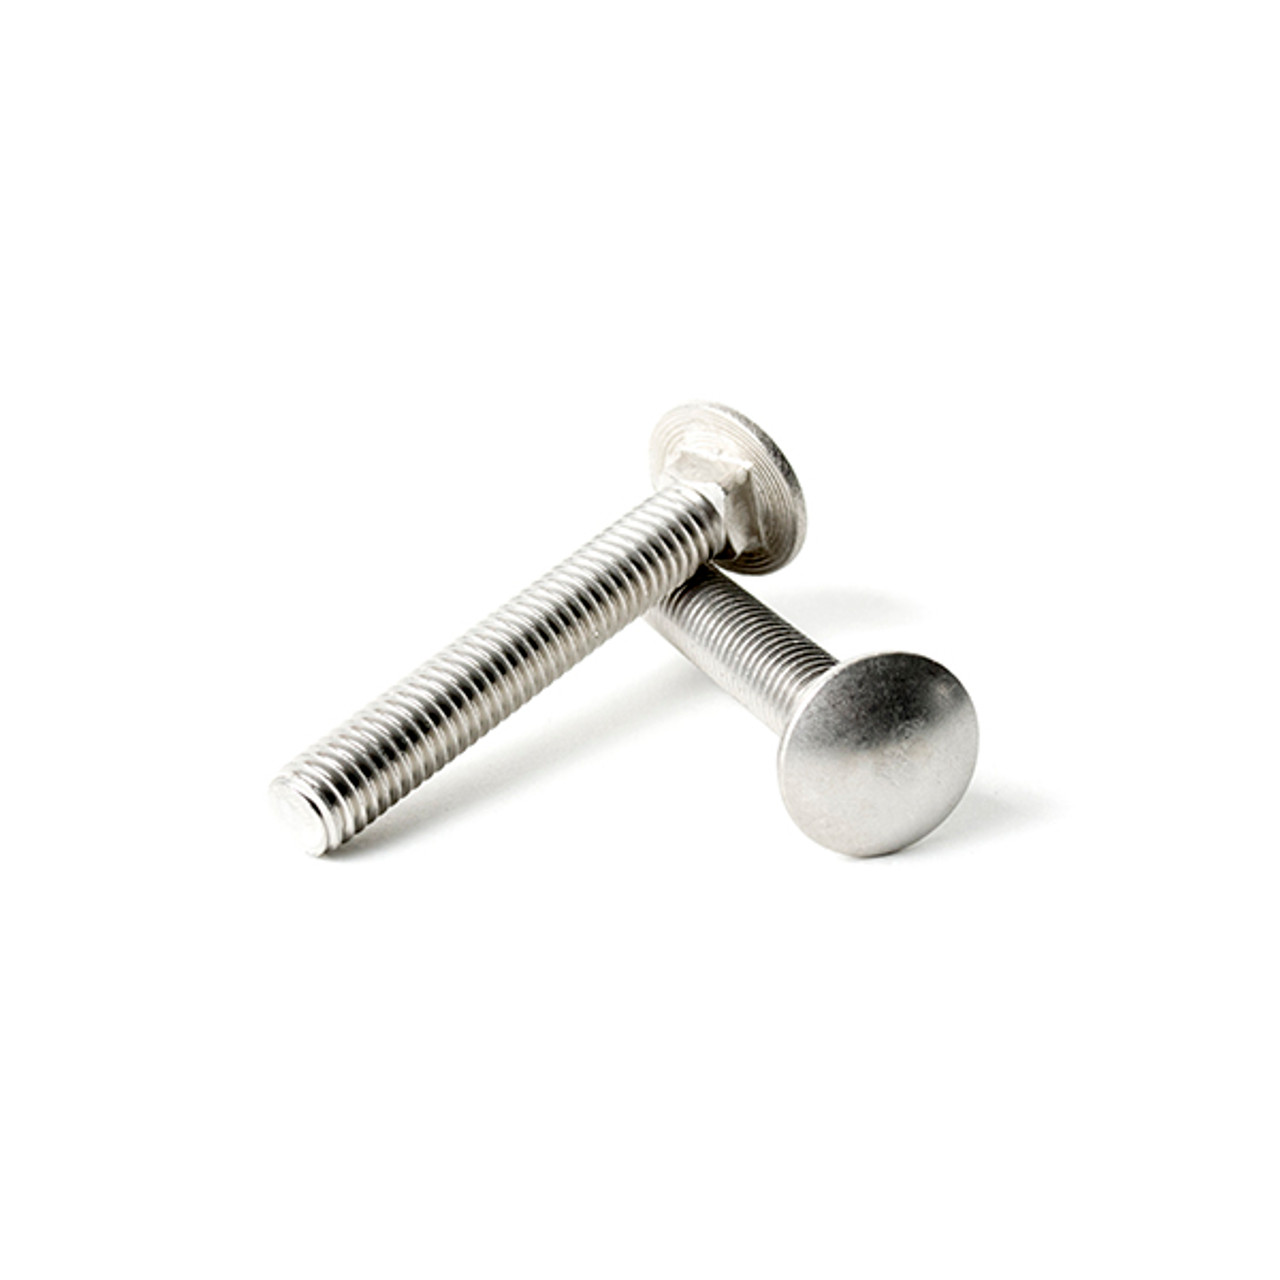 Carriage Bolt Stainless Steel 3/8-16 x 1-1/2 Qty 10